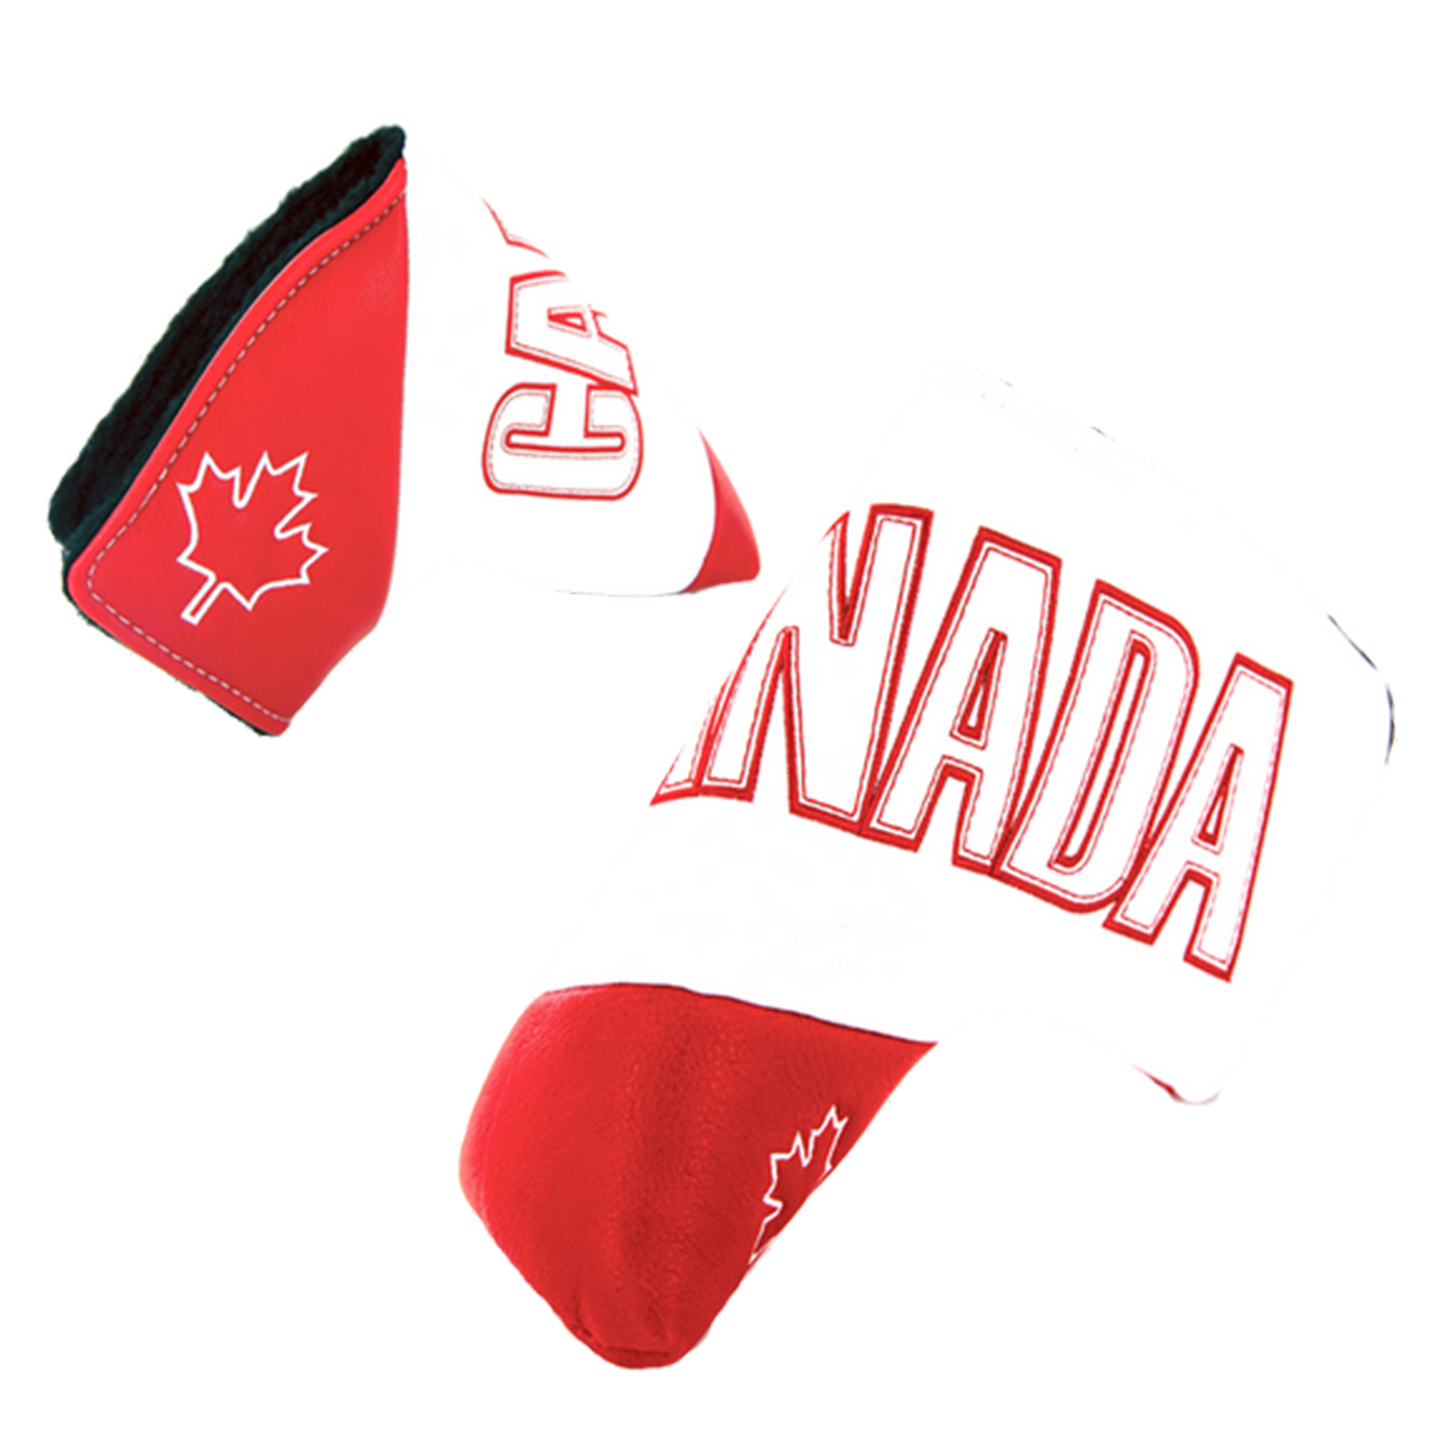 Canada Blade Putter Cover